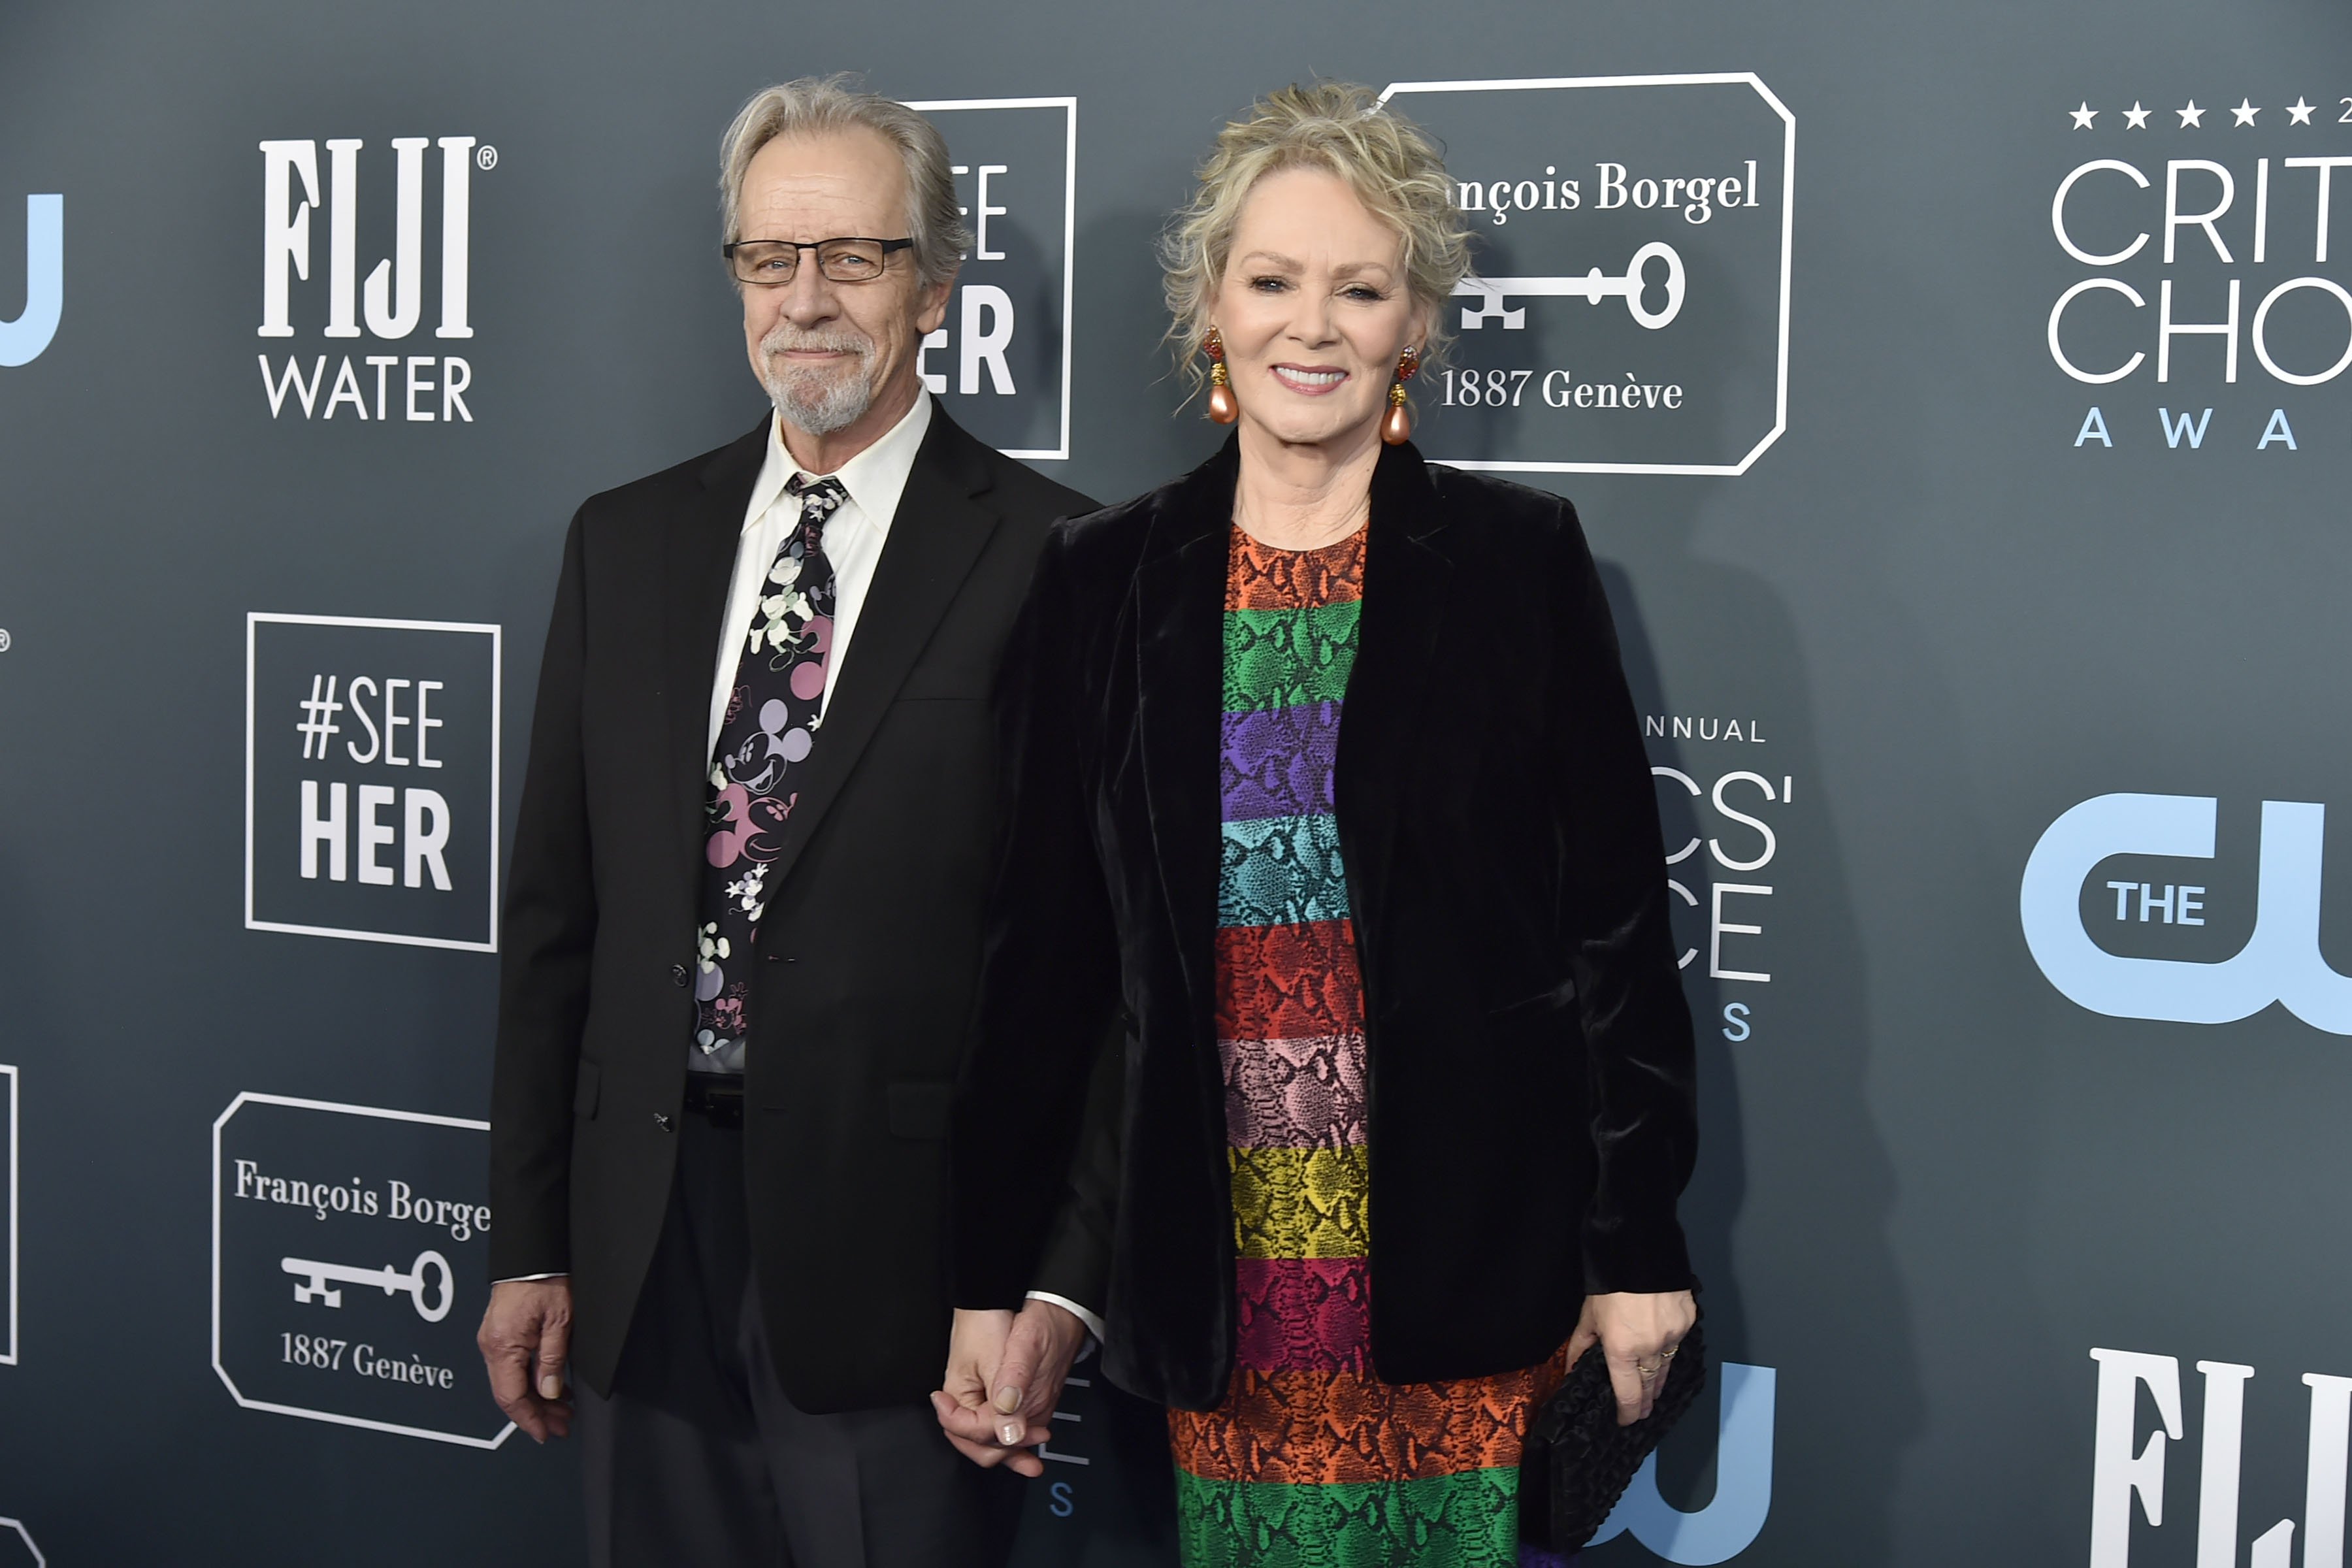 Richard Gilliland and Jean Smart during the arrivals for the 25th Annual Critics' Choice Awards at Barker Hangar on January 12, 2020 in Santa Monica, CA. | Source: Getty Images